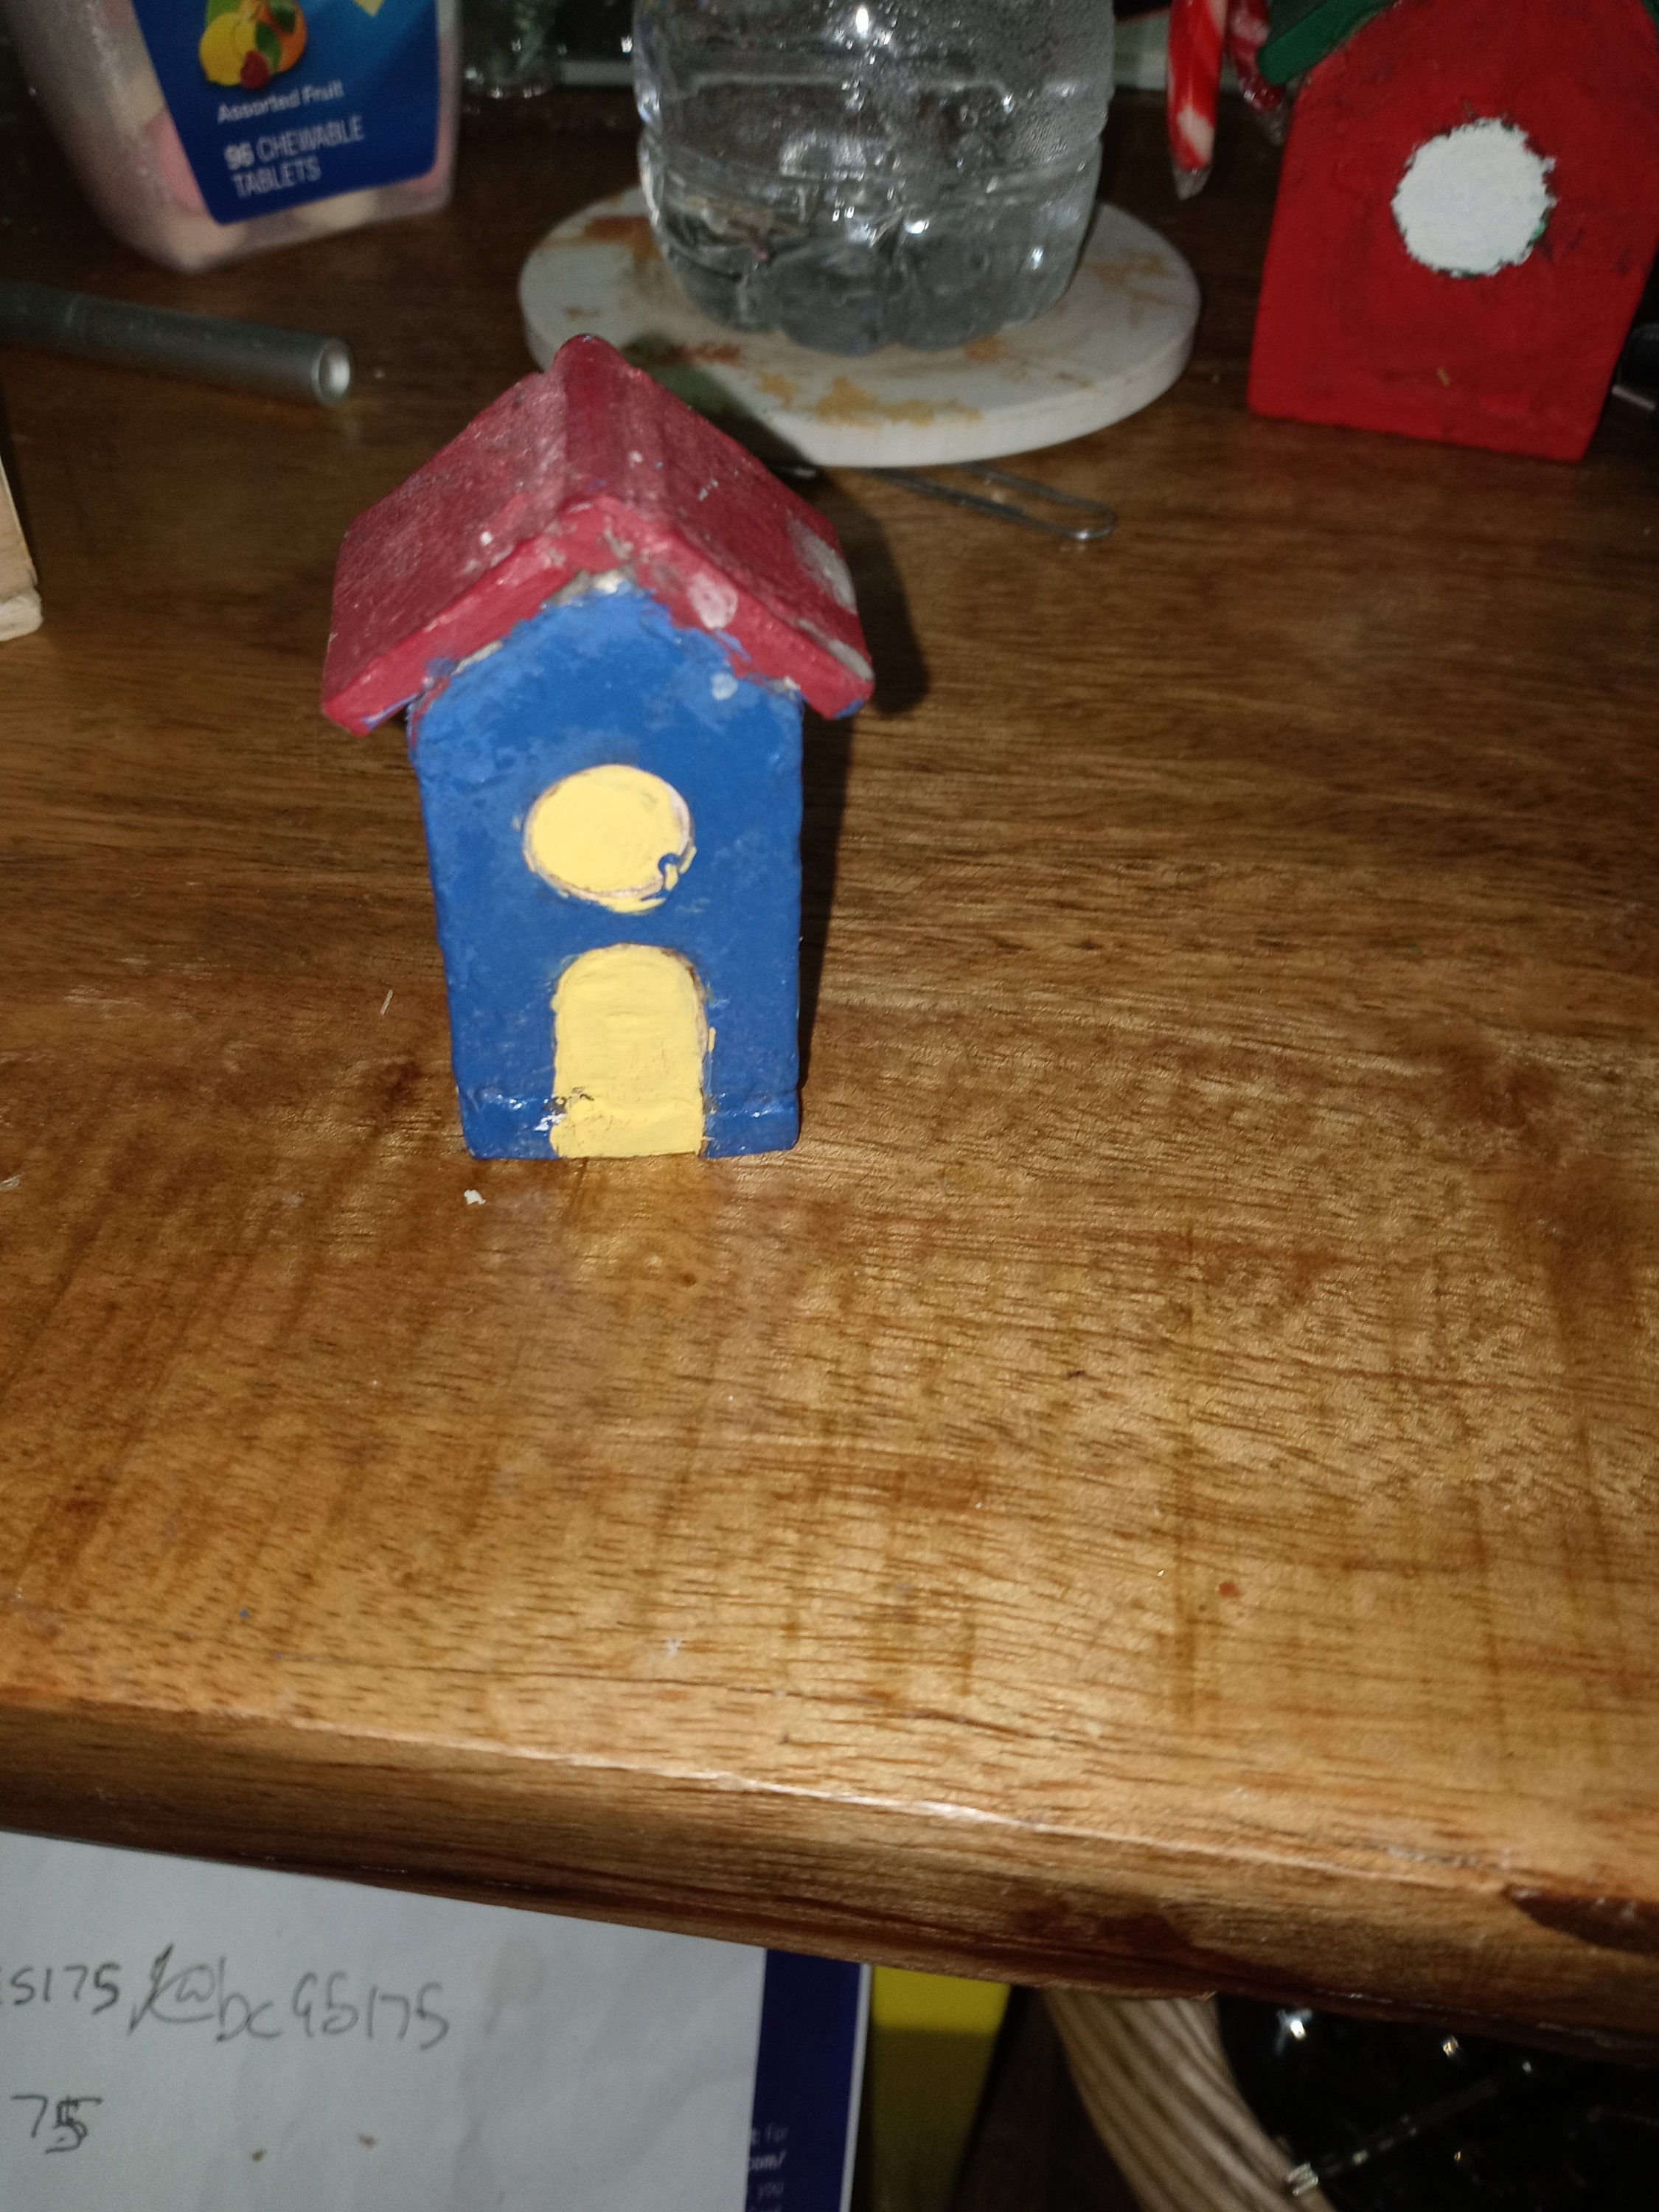 Small Wooden House From 2.00 GBP